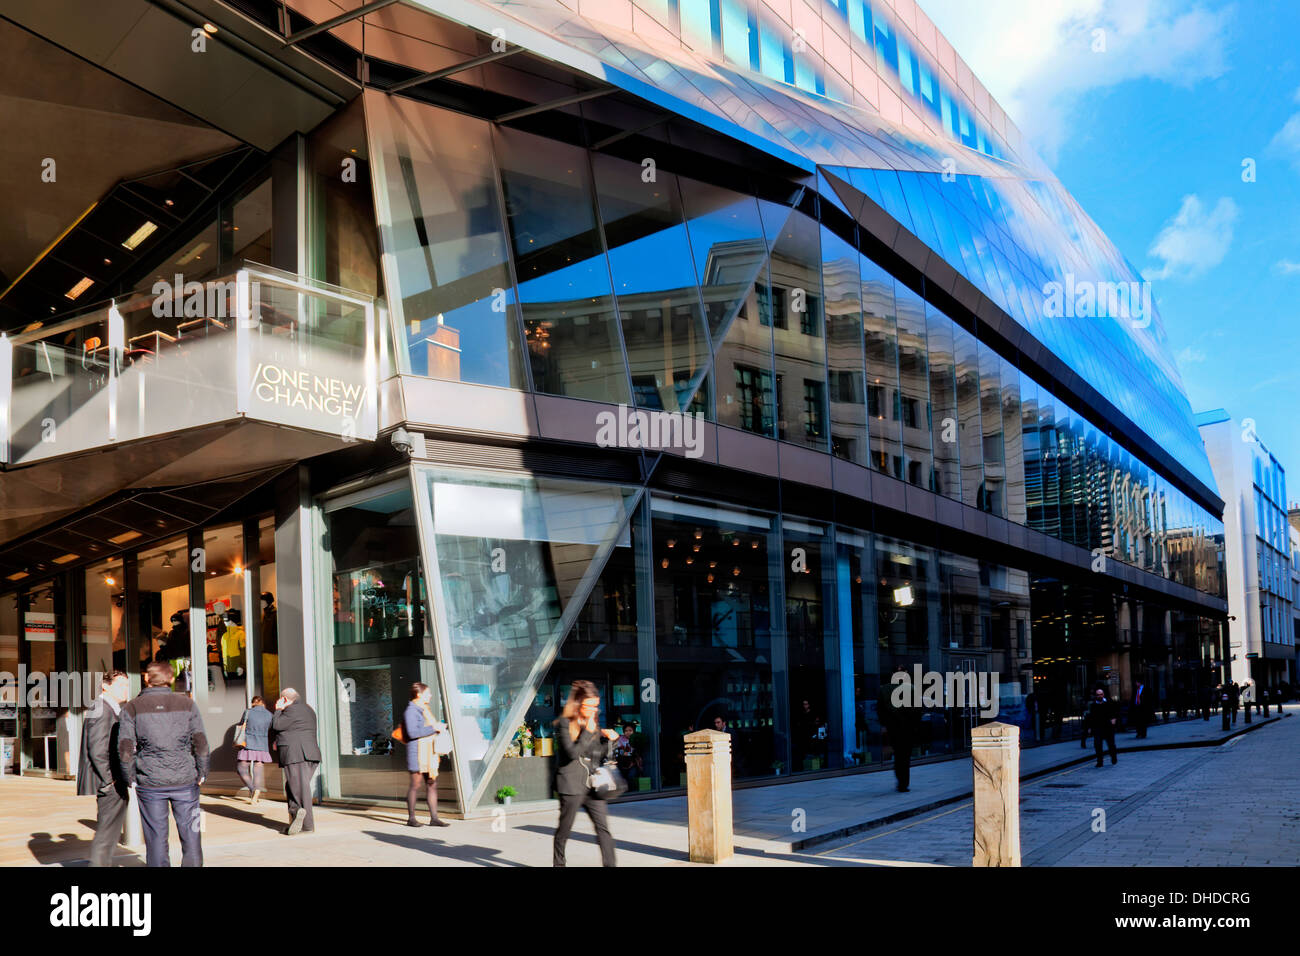 One New Change Shopping Centre, Cheapside, London, England Stock Photo